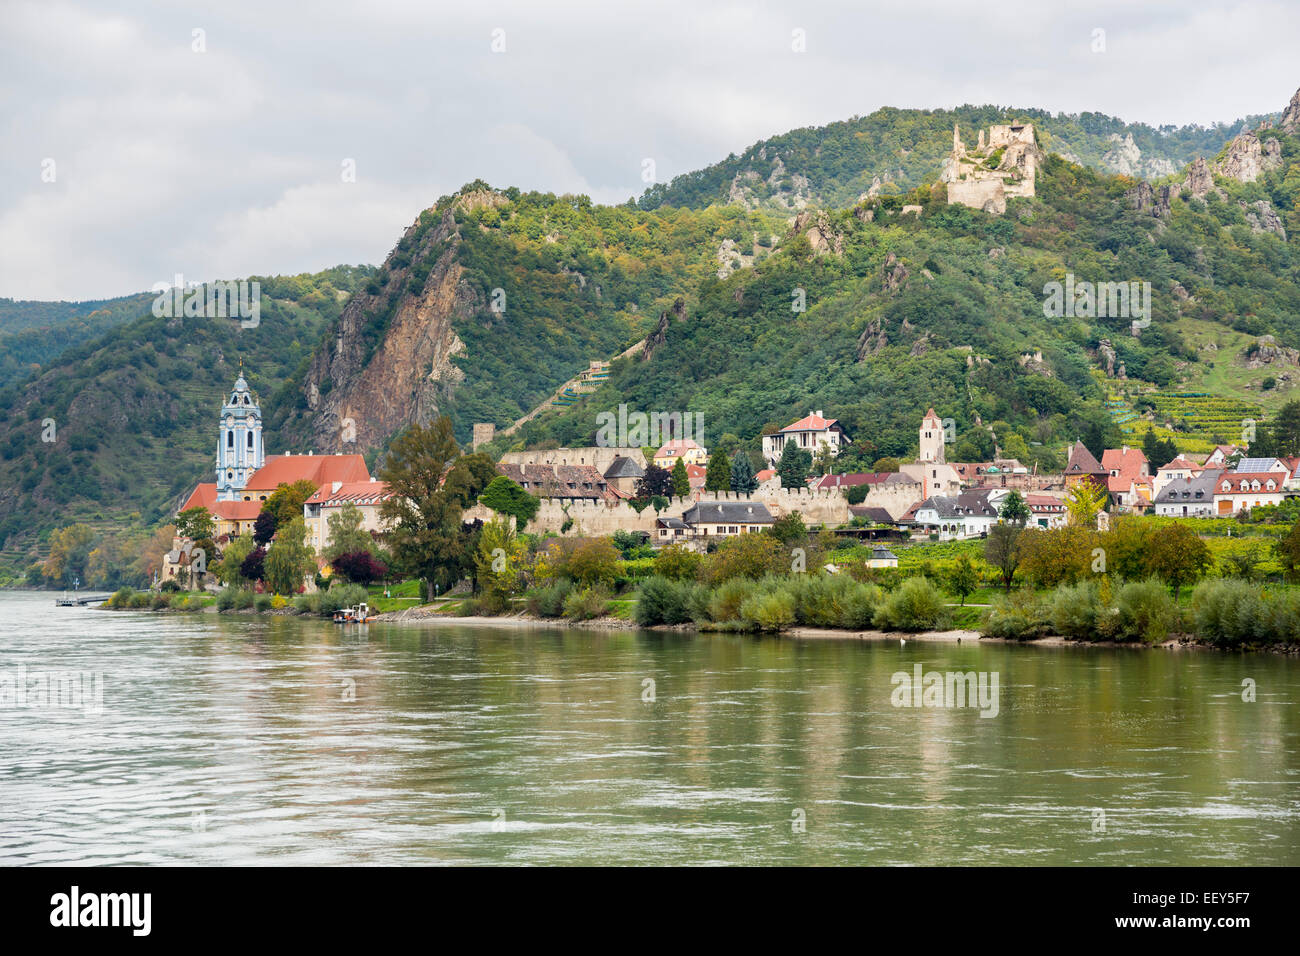 Ornate church, hilltop castle and buildings on banks of River Danube in Durnstein, Austria Stock Photo